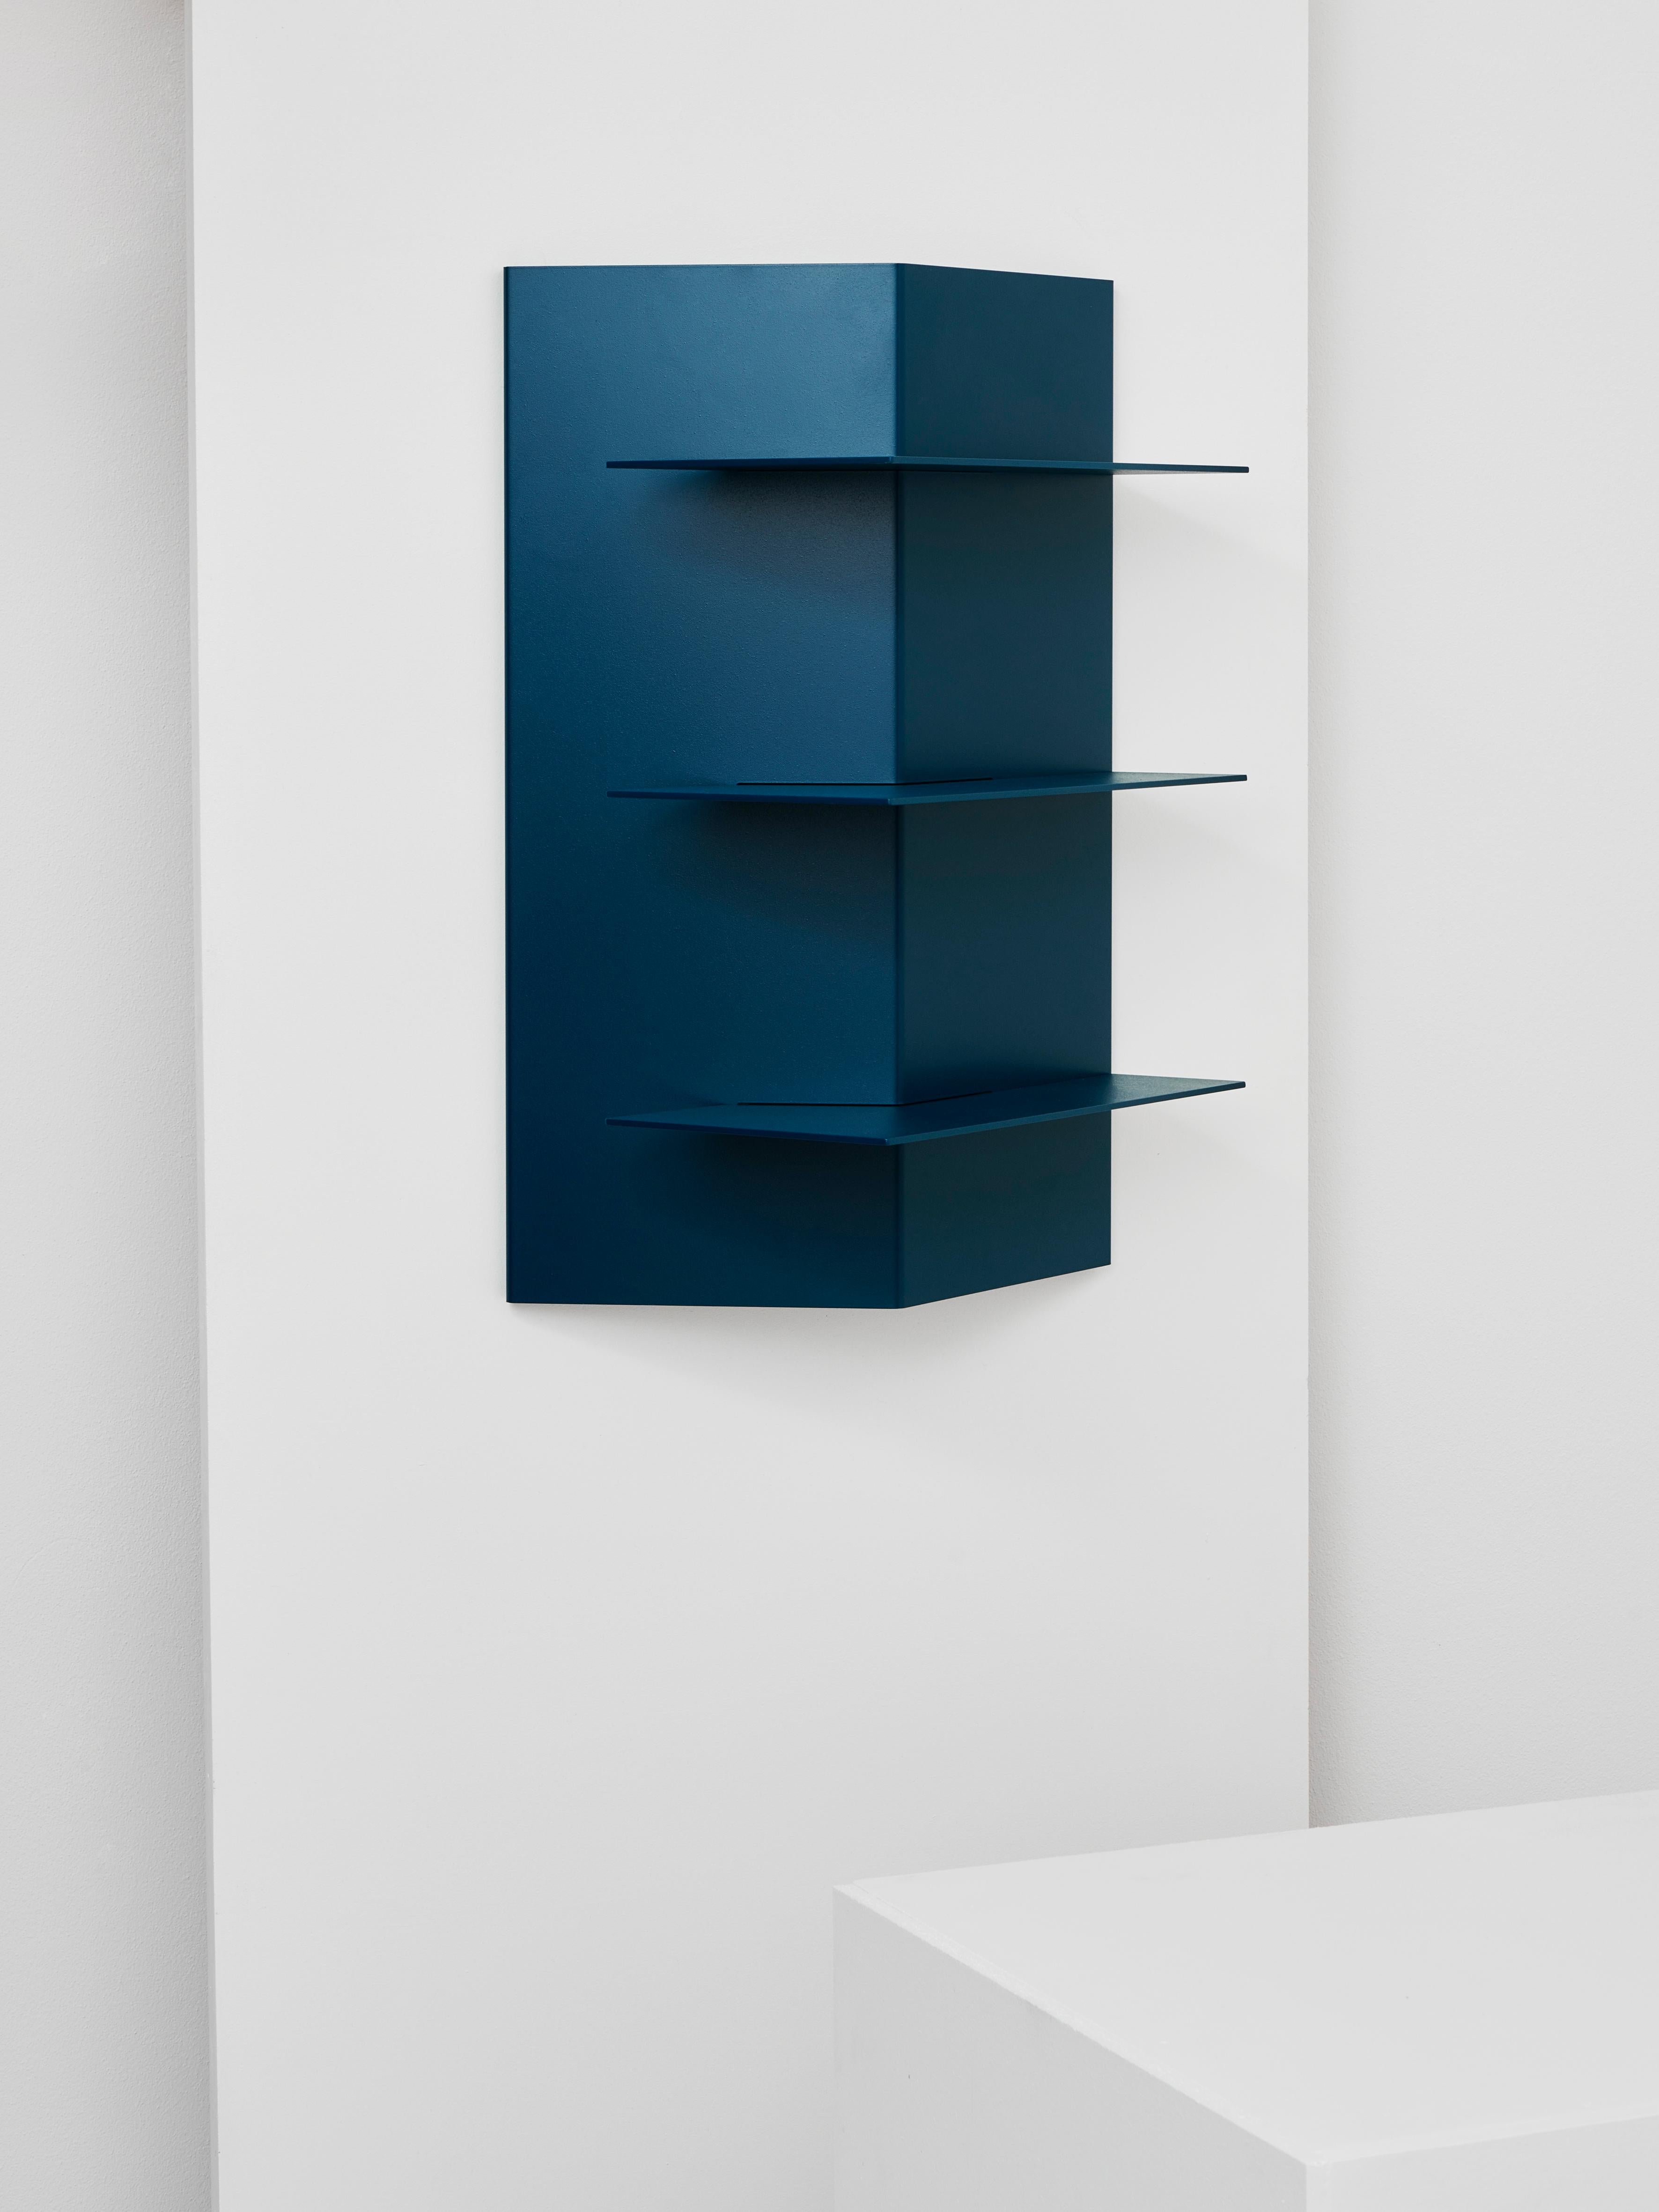 F O L D E D - Mirror
The FOLDED wall cabinet acts as a shelf and mirror for the entrance or bedroom
read. The simple assembly allows you to alternate the two configurations, thus adapting to the changing needs of users:

In the Folded-Shelf